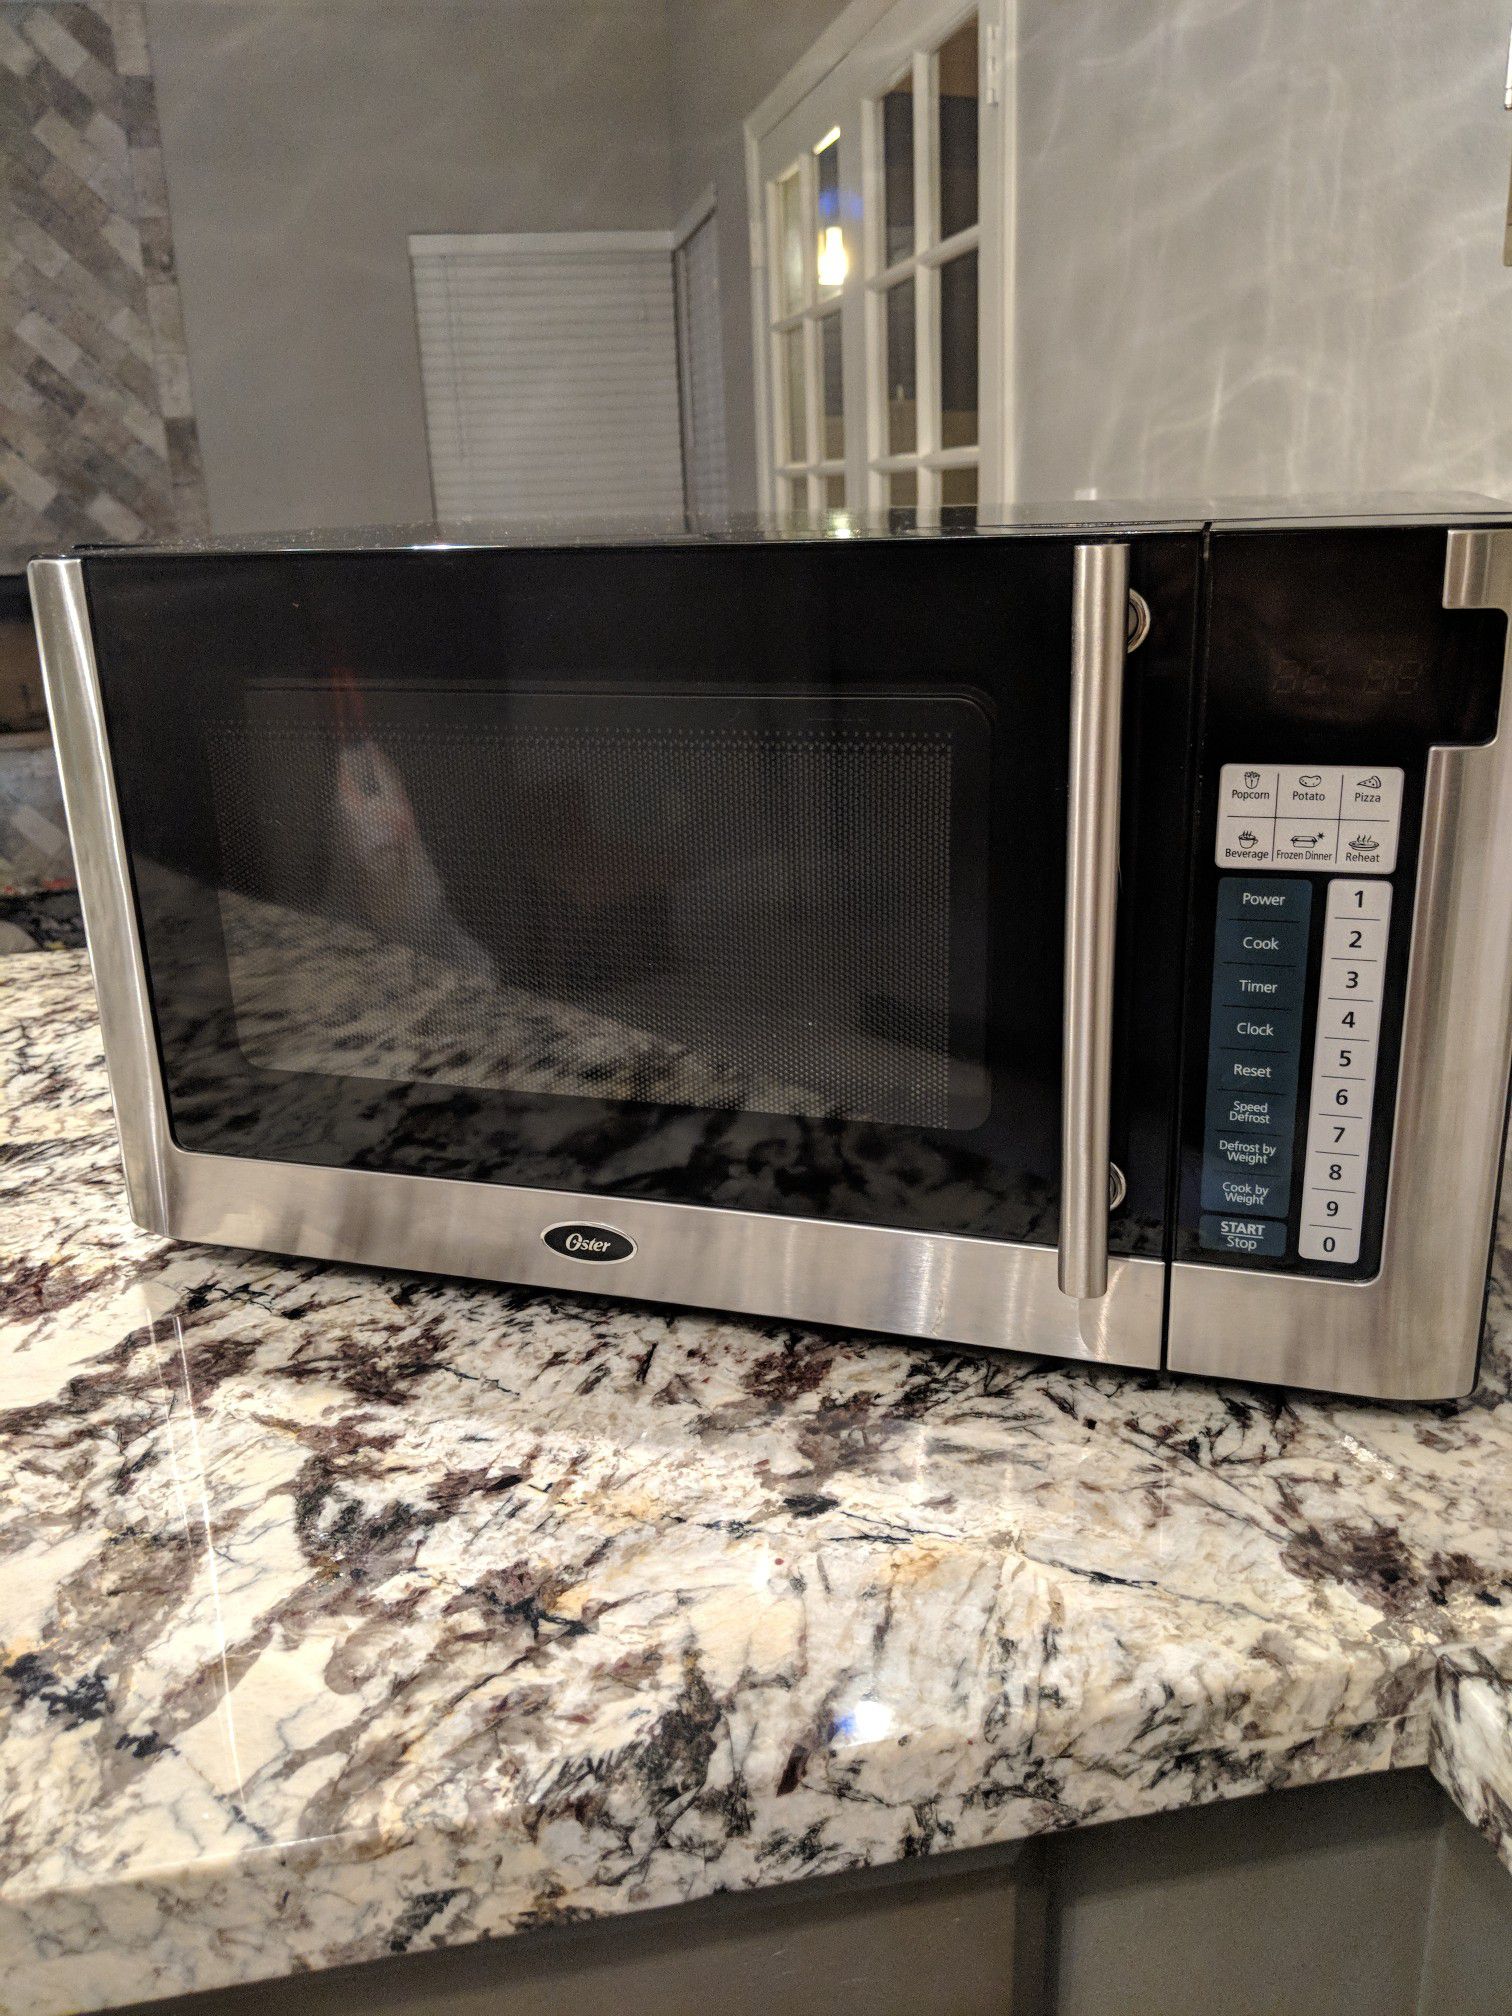 Oster 1.1cu. ft. Microwave Stainless Steel - American Stores